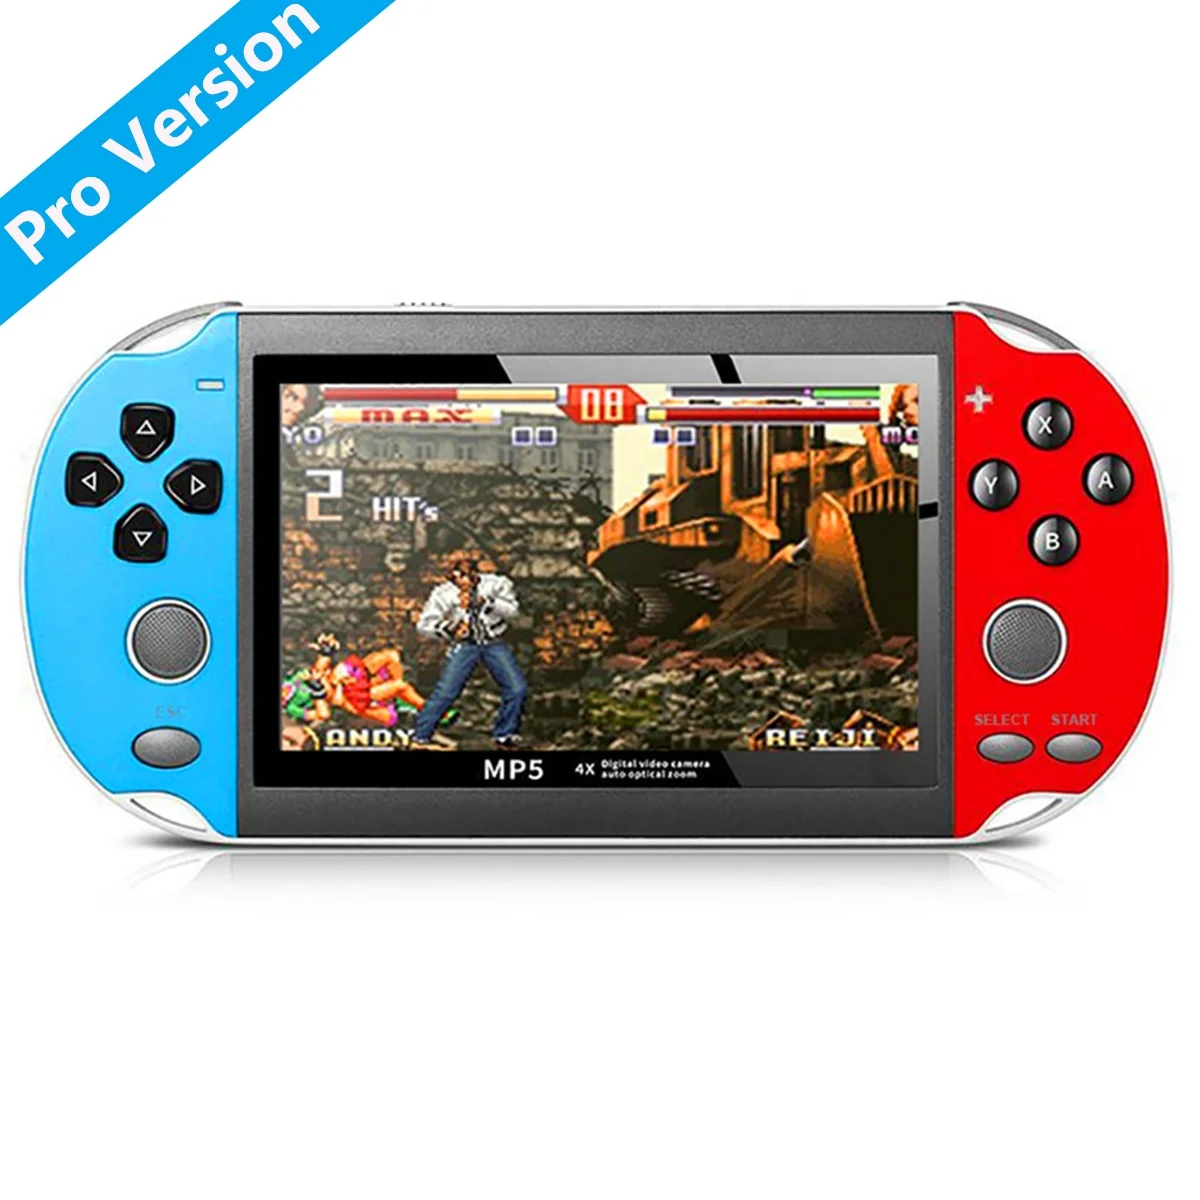 

Top quality Portable Handheld PS Mini Game Console X9 X12 X13 X7 X6 Plus 128 bit Video Games Consoles TV Player, Blue red